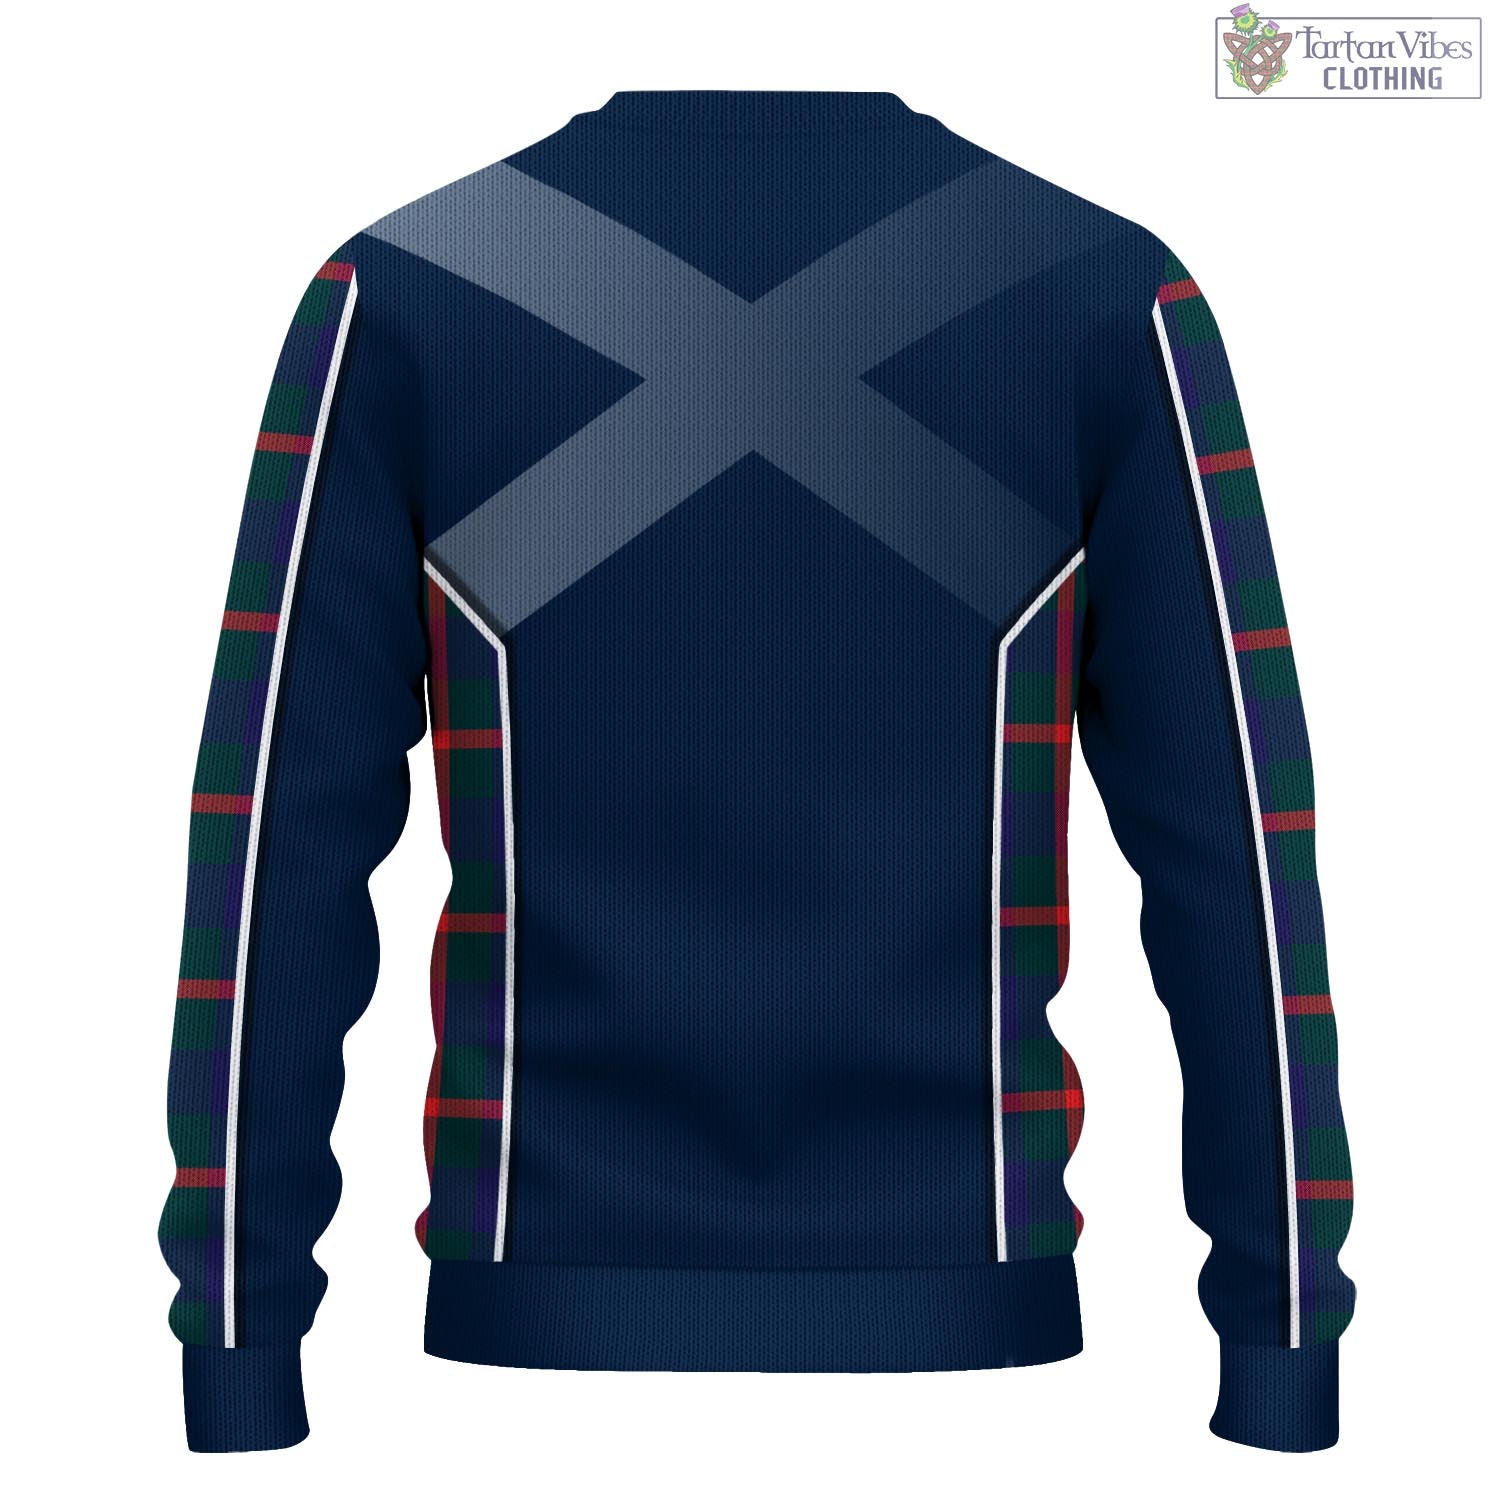 Tartan Vibes Clothing Agnew Modern Tartan Knitted Sweatshirt with Family Crest and Scottish Thistle Vibes Sport Style